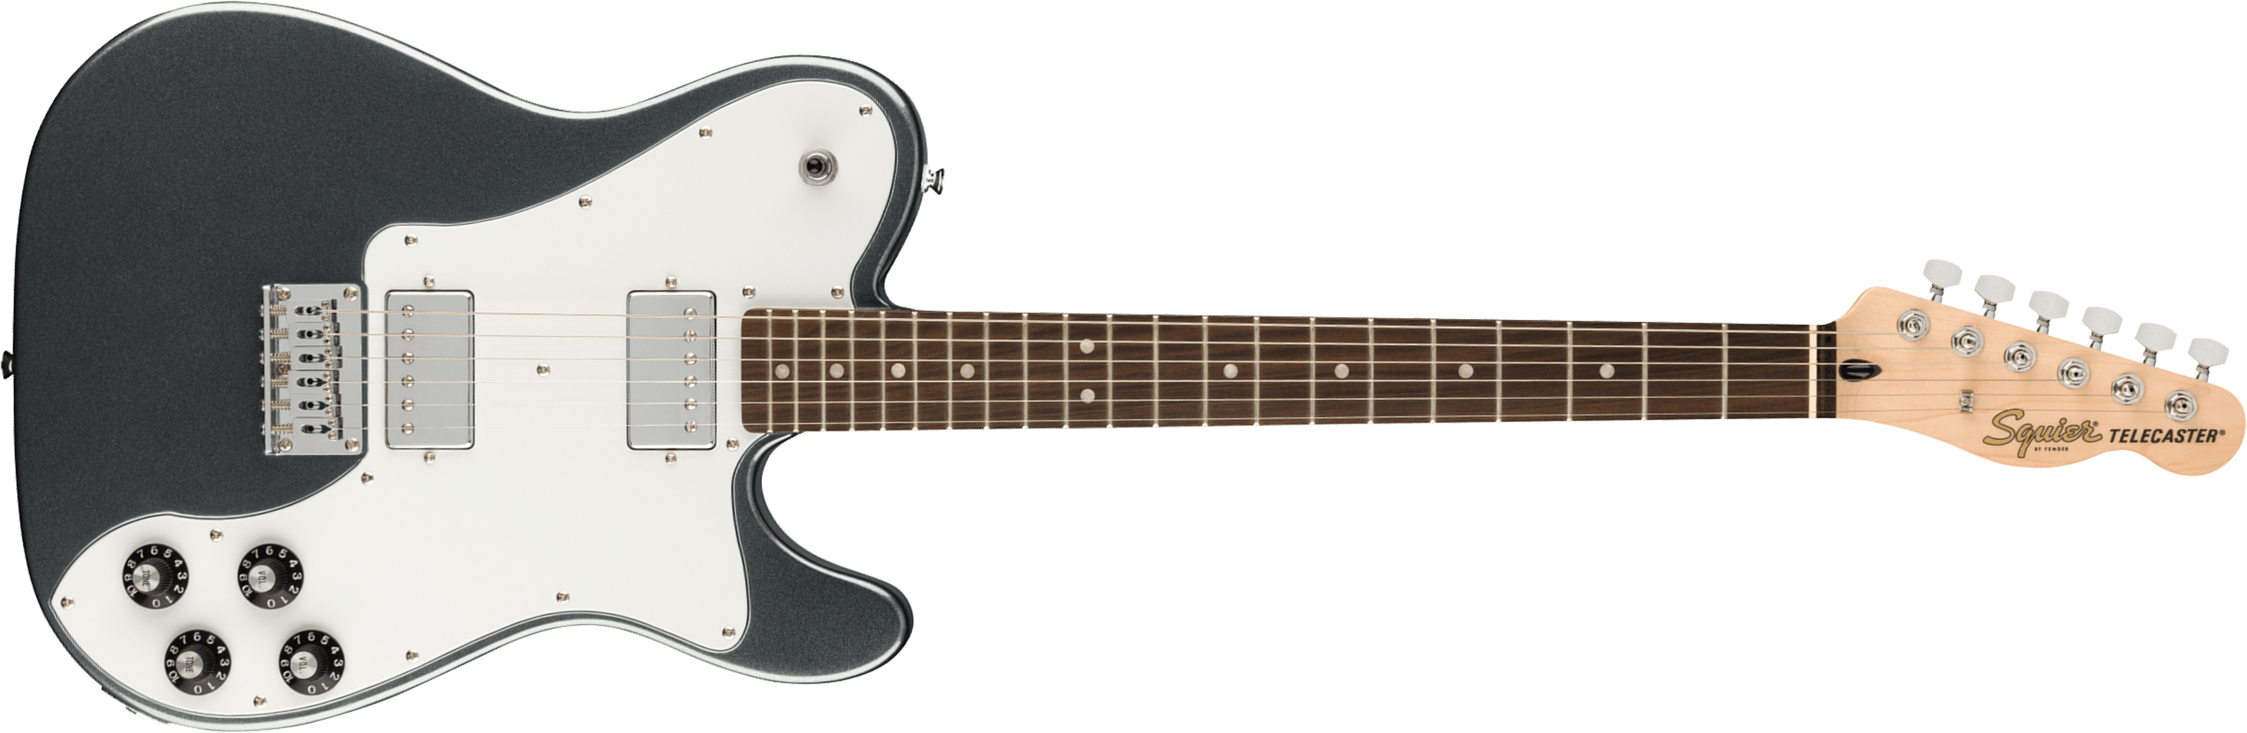 Squier Tele Affinity Deluxe 2021 Hh Ht Lau - Charcoal Frost Metallic - Tel shape electric guitar - Main picture